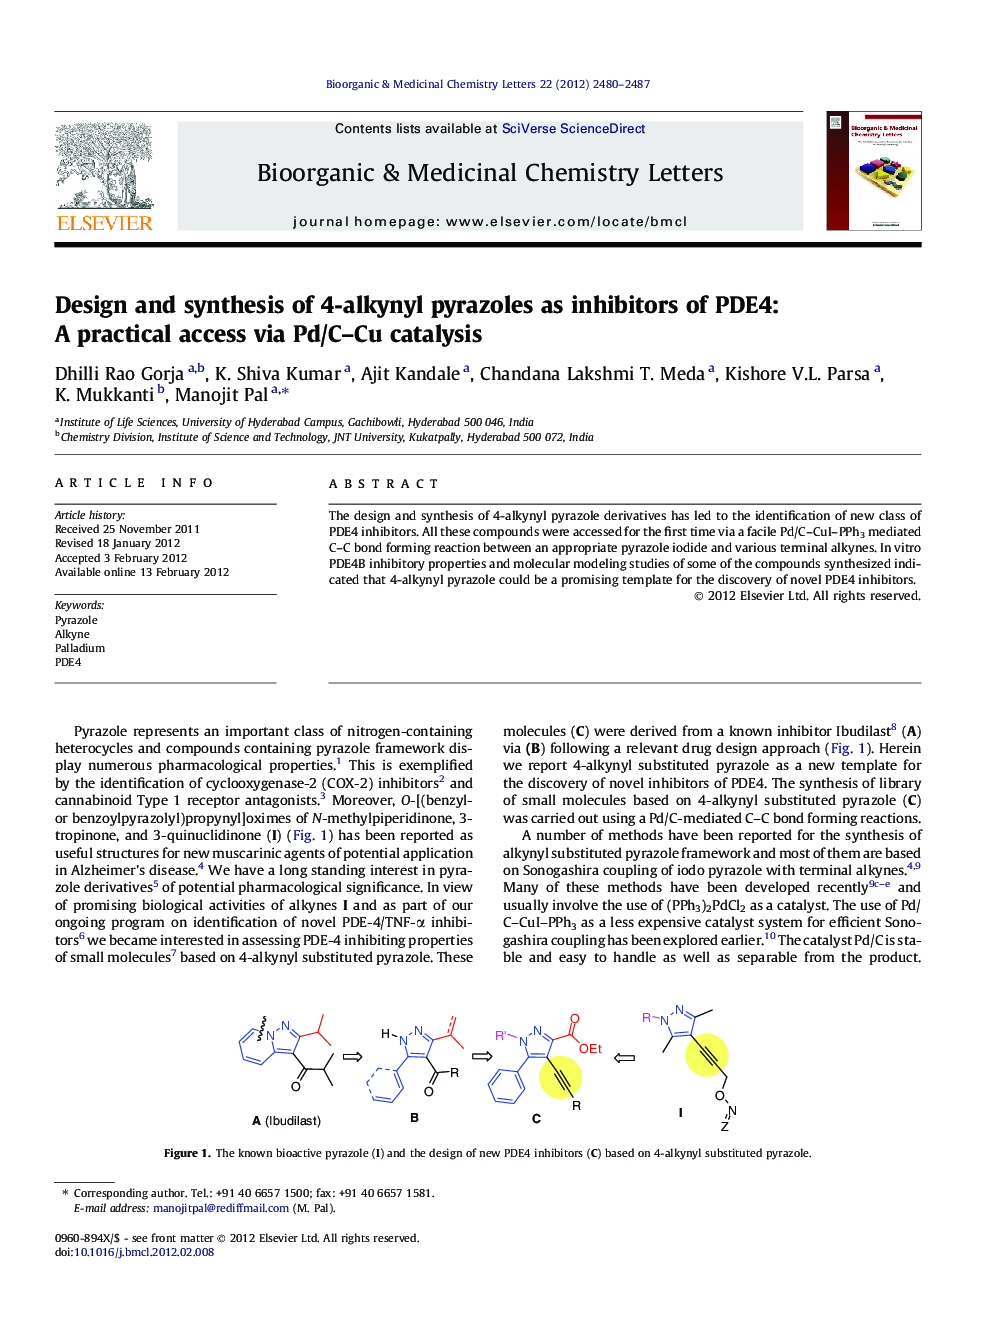 Design and synthesis of 4-alkynyl pyrazoles as inhibitors of PDE4: A practical access via Pd/C–Cu catalysis